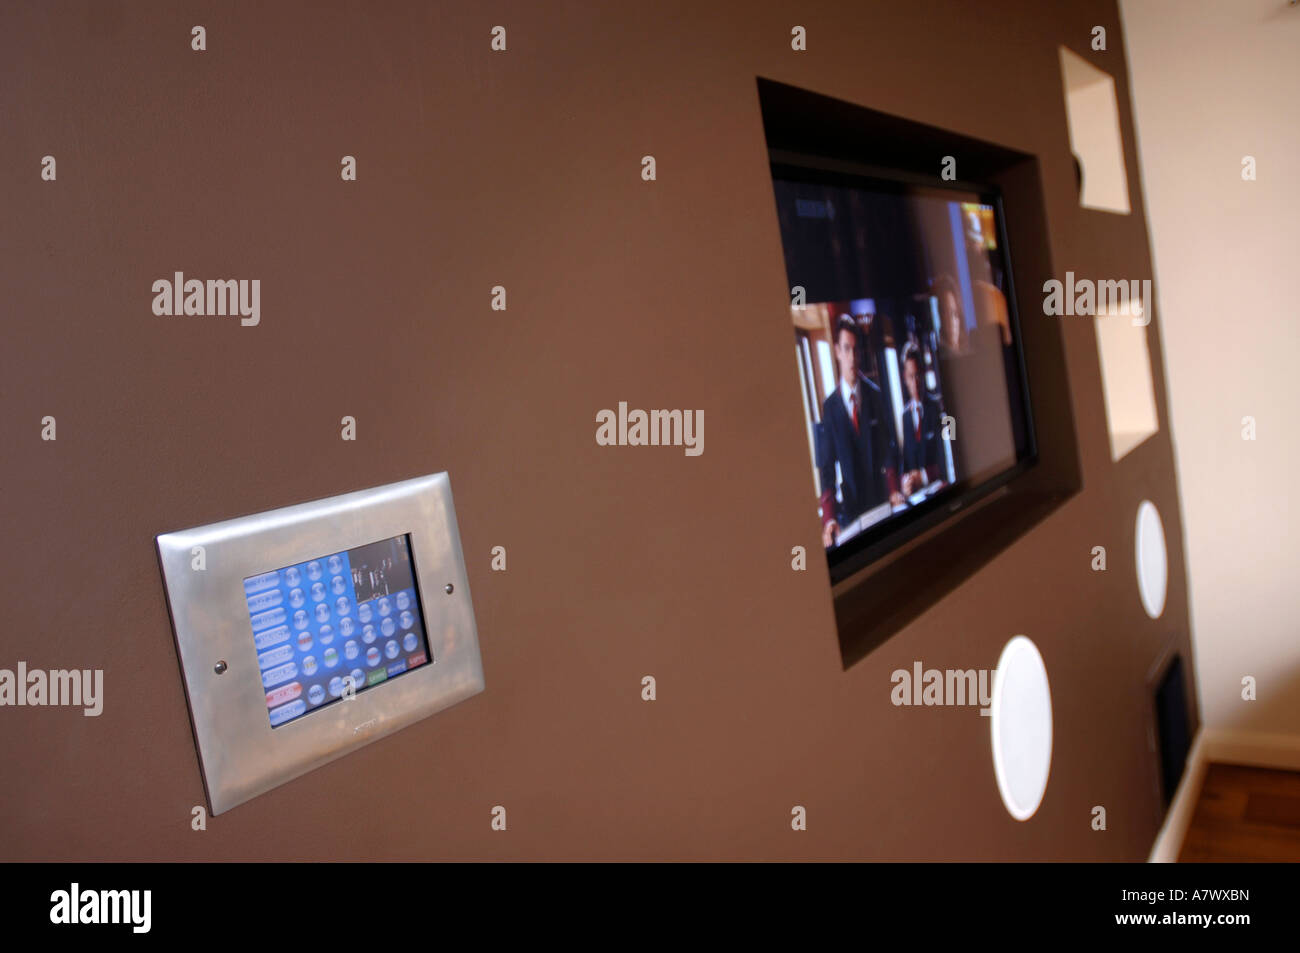 A CONTROL PANEL IN A SMART HOUSE WITH INTEGRATED SYSTEMS OF SECURITY AUDIO VISUAL HEATING AND LIGHTING UK Stock Photo